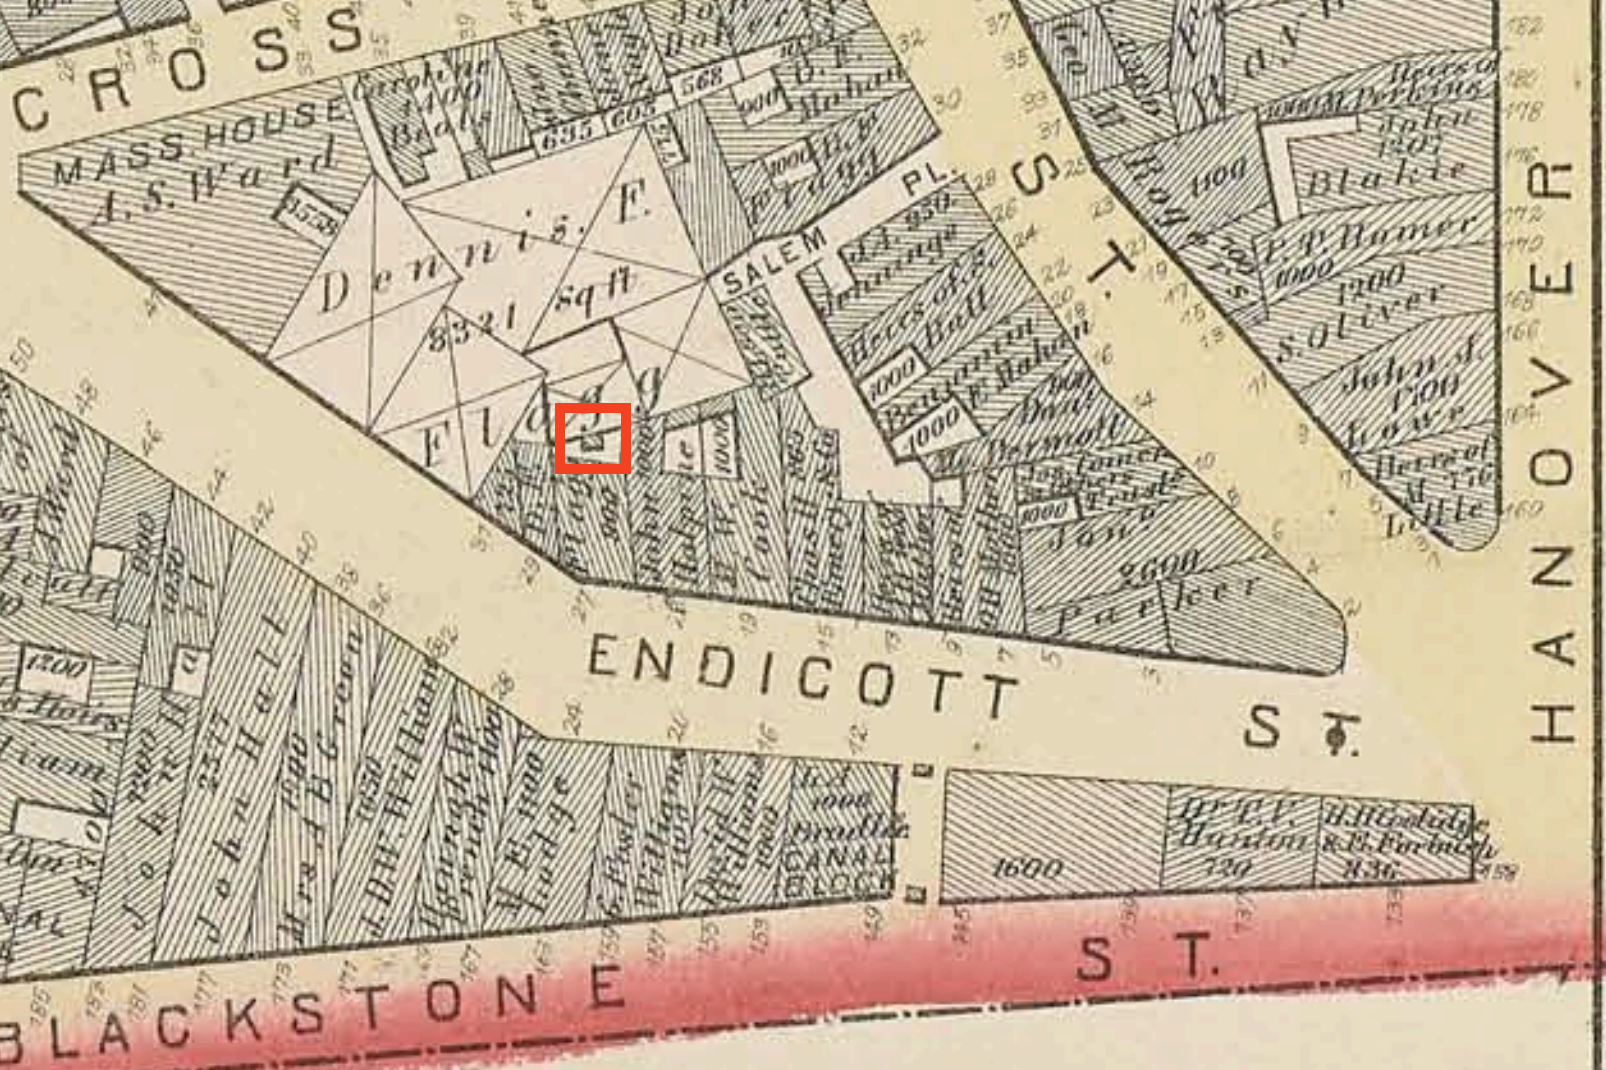 An 1874 map showing the location of the 27-29 Endicott Street brothel in the North End